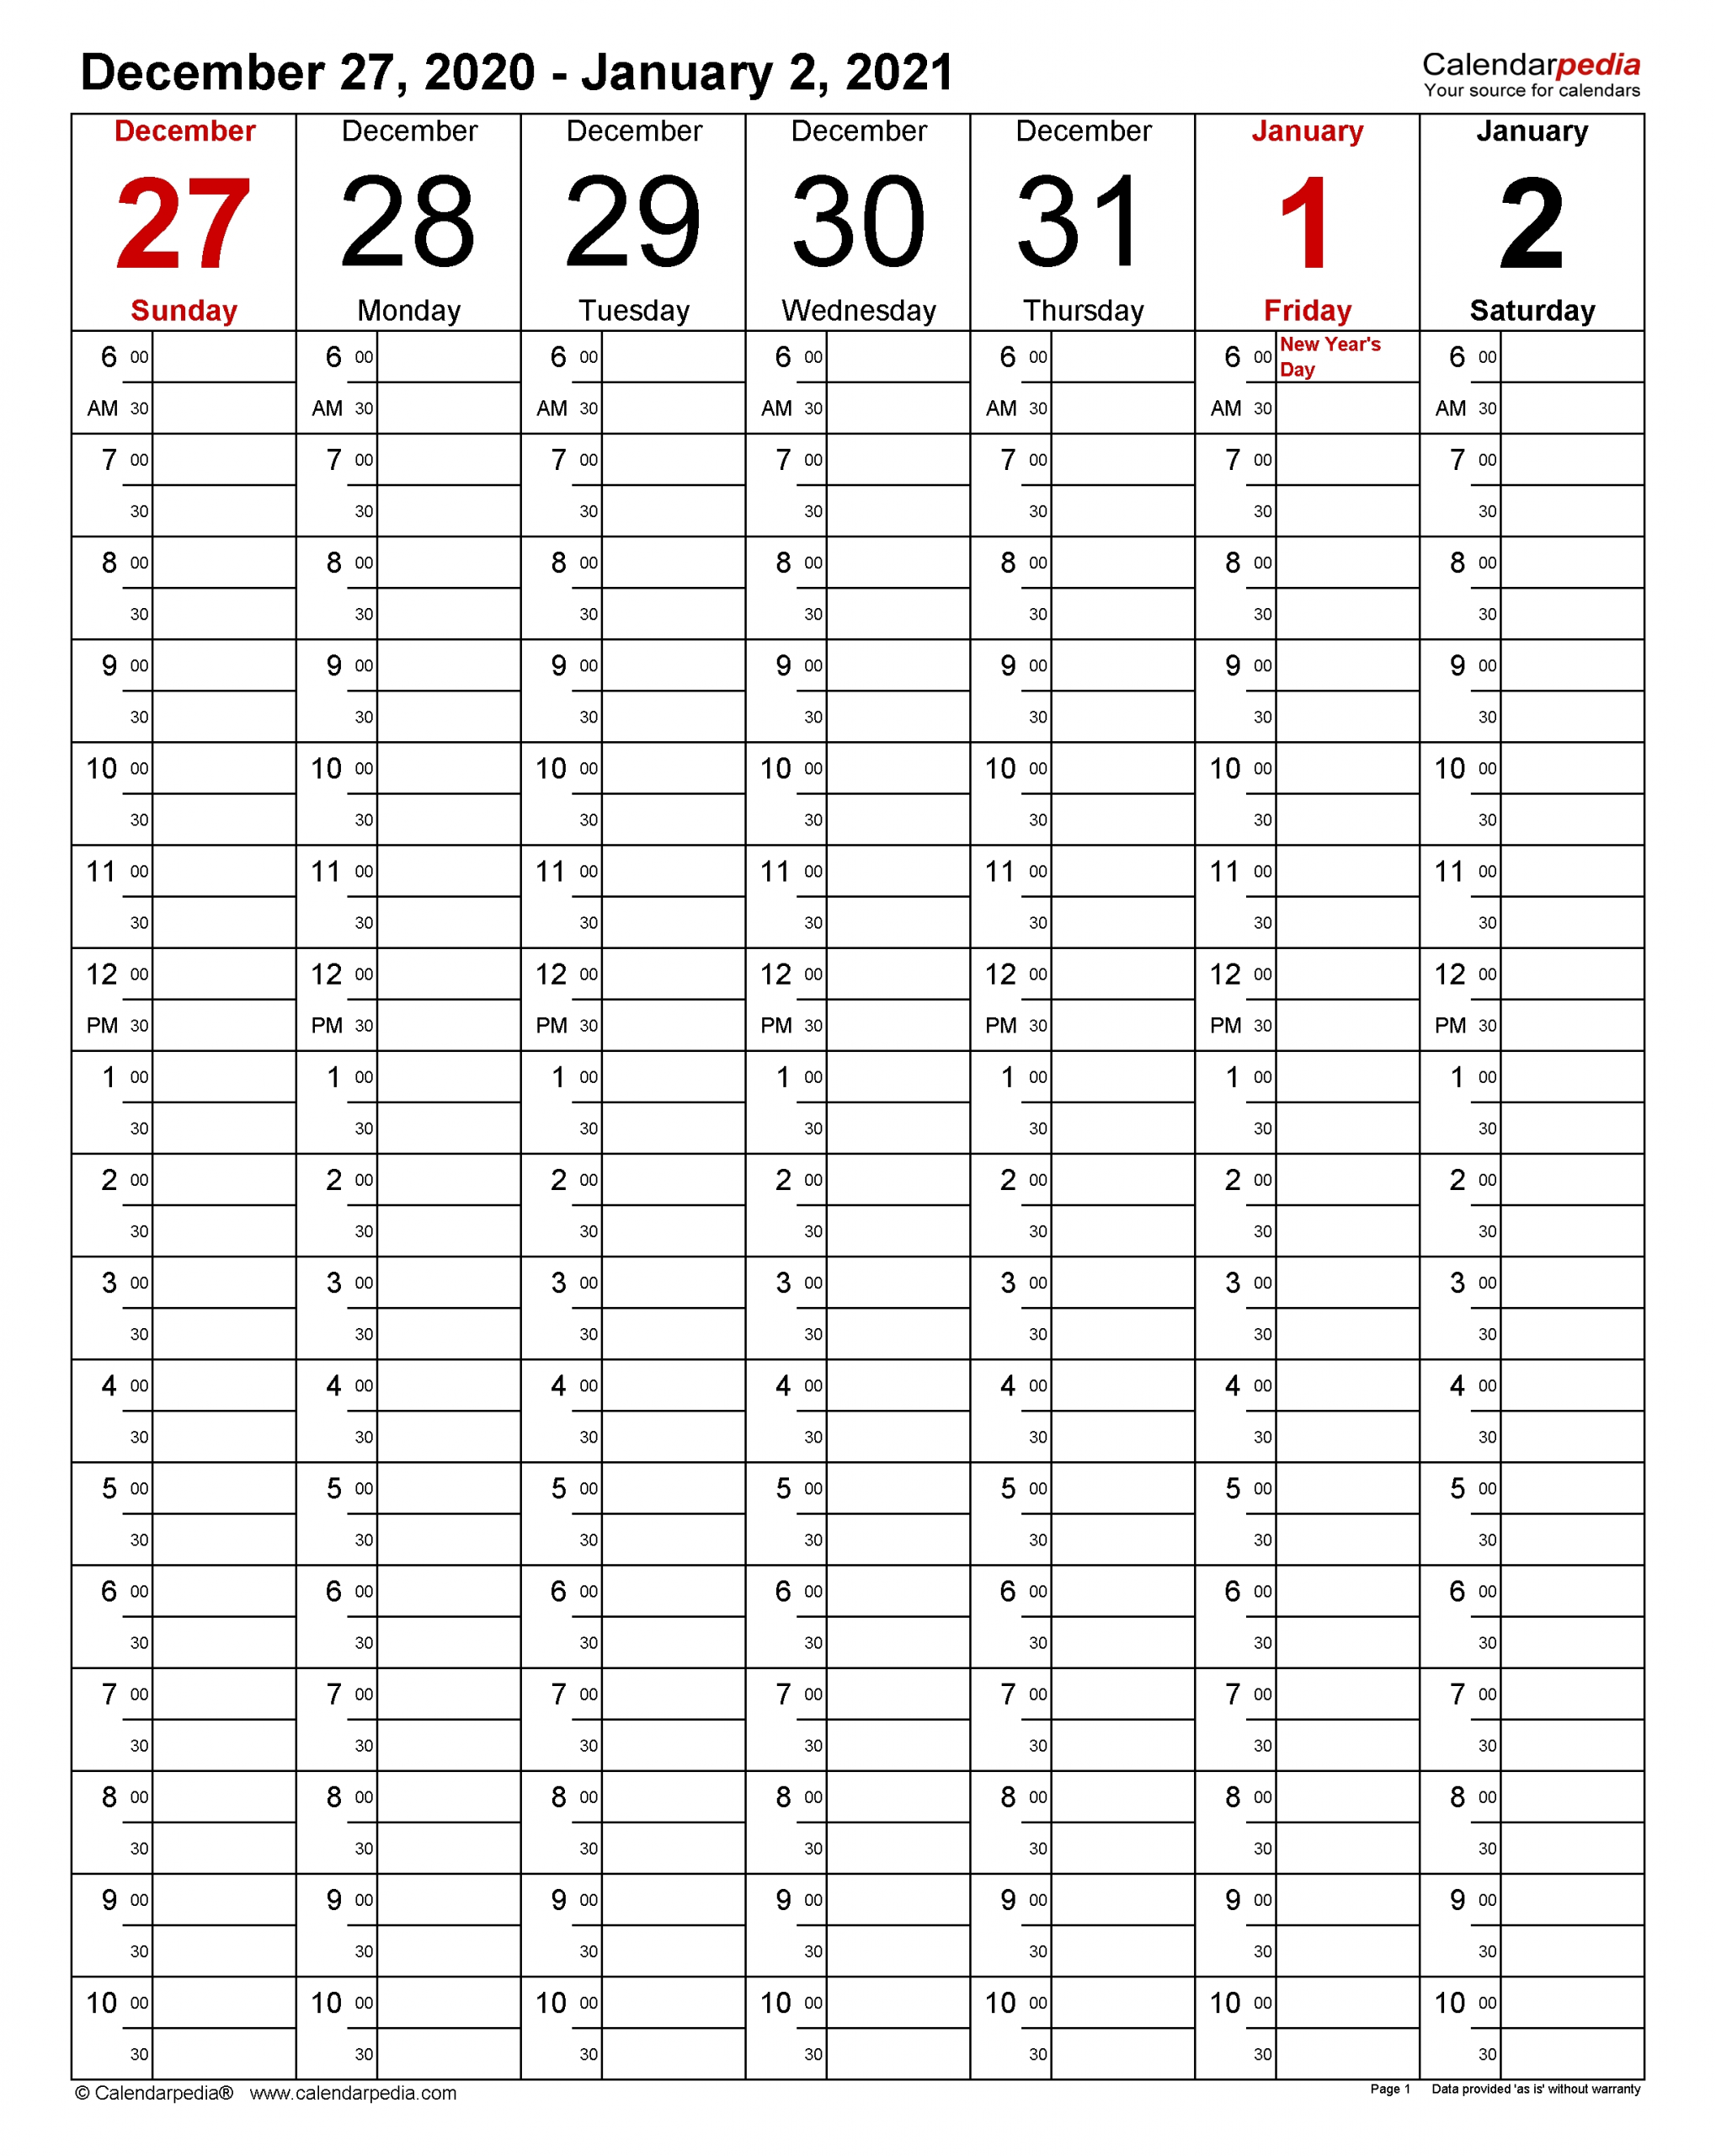 Weekly Calendars 2021 For Word - 12 Free Printable Templates